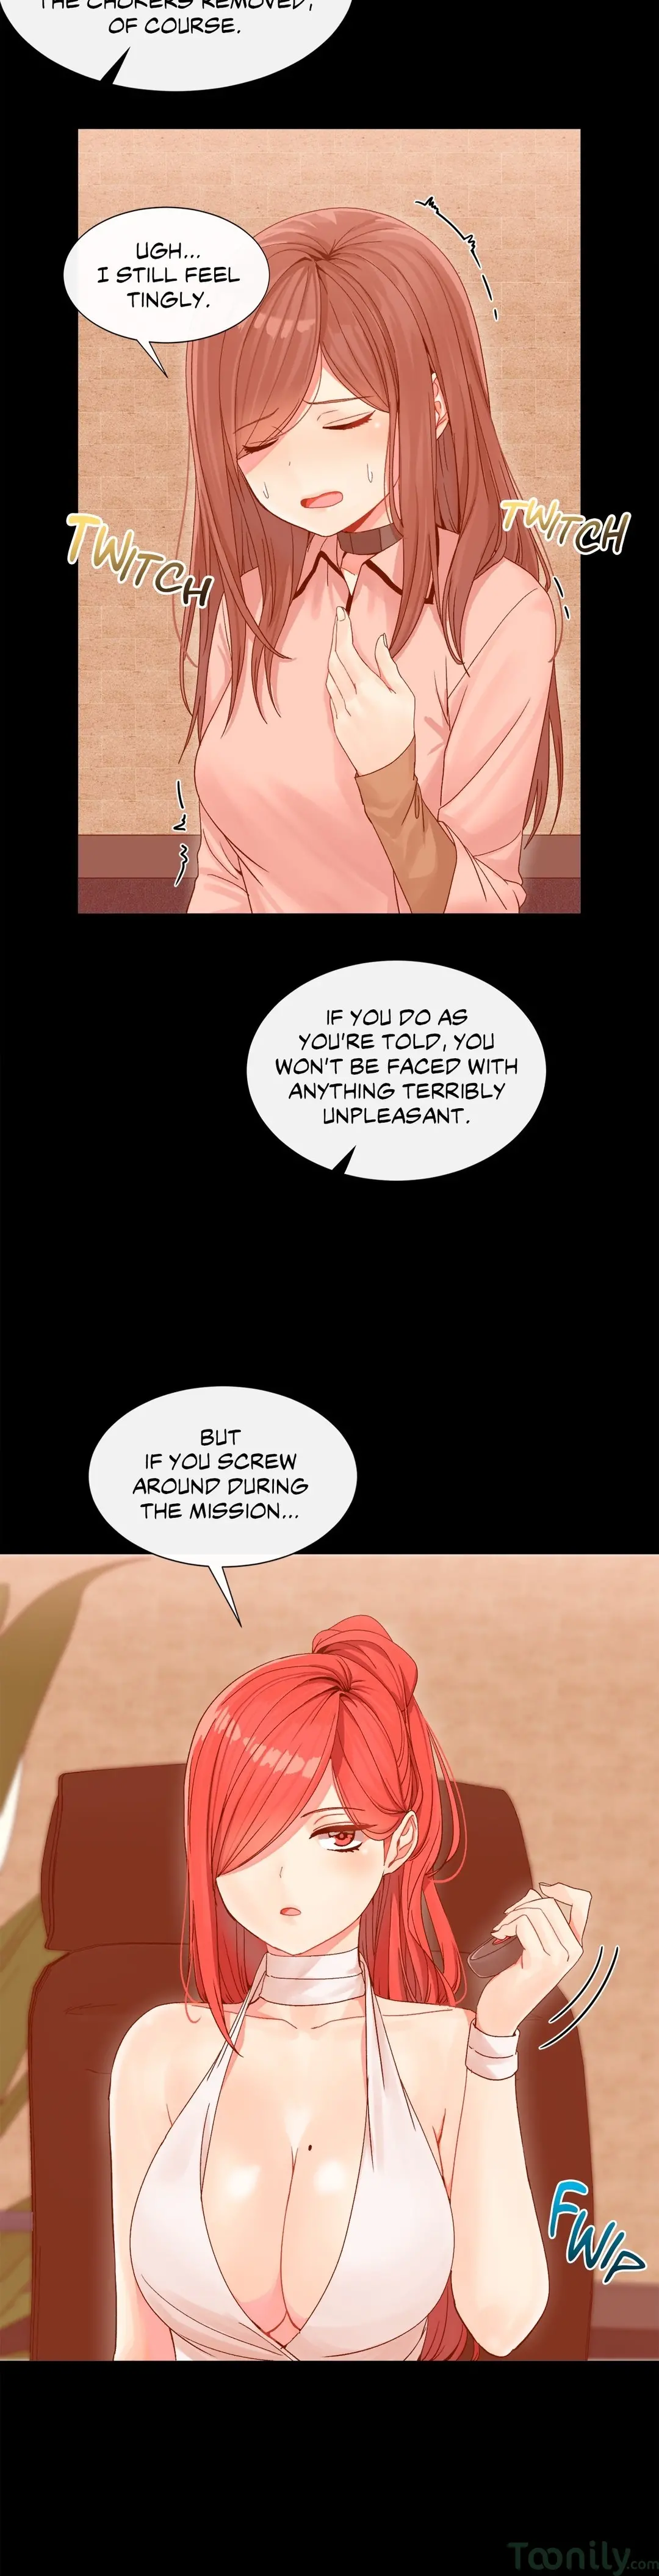 Deceptions - Chapter 3 Page 14